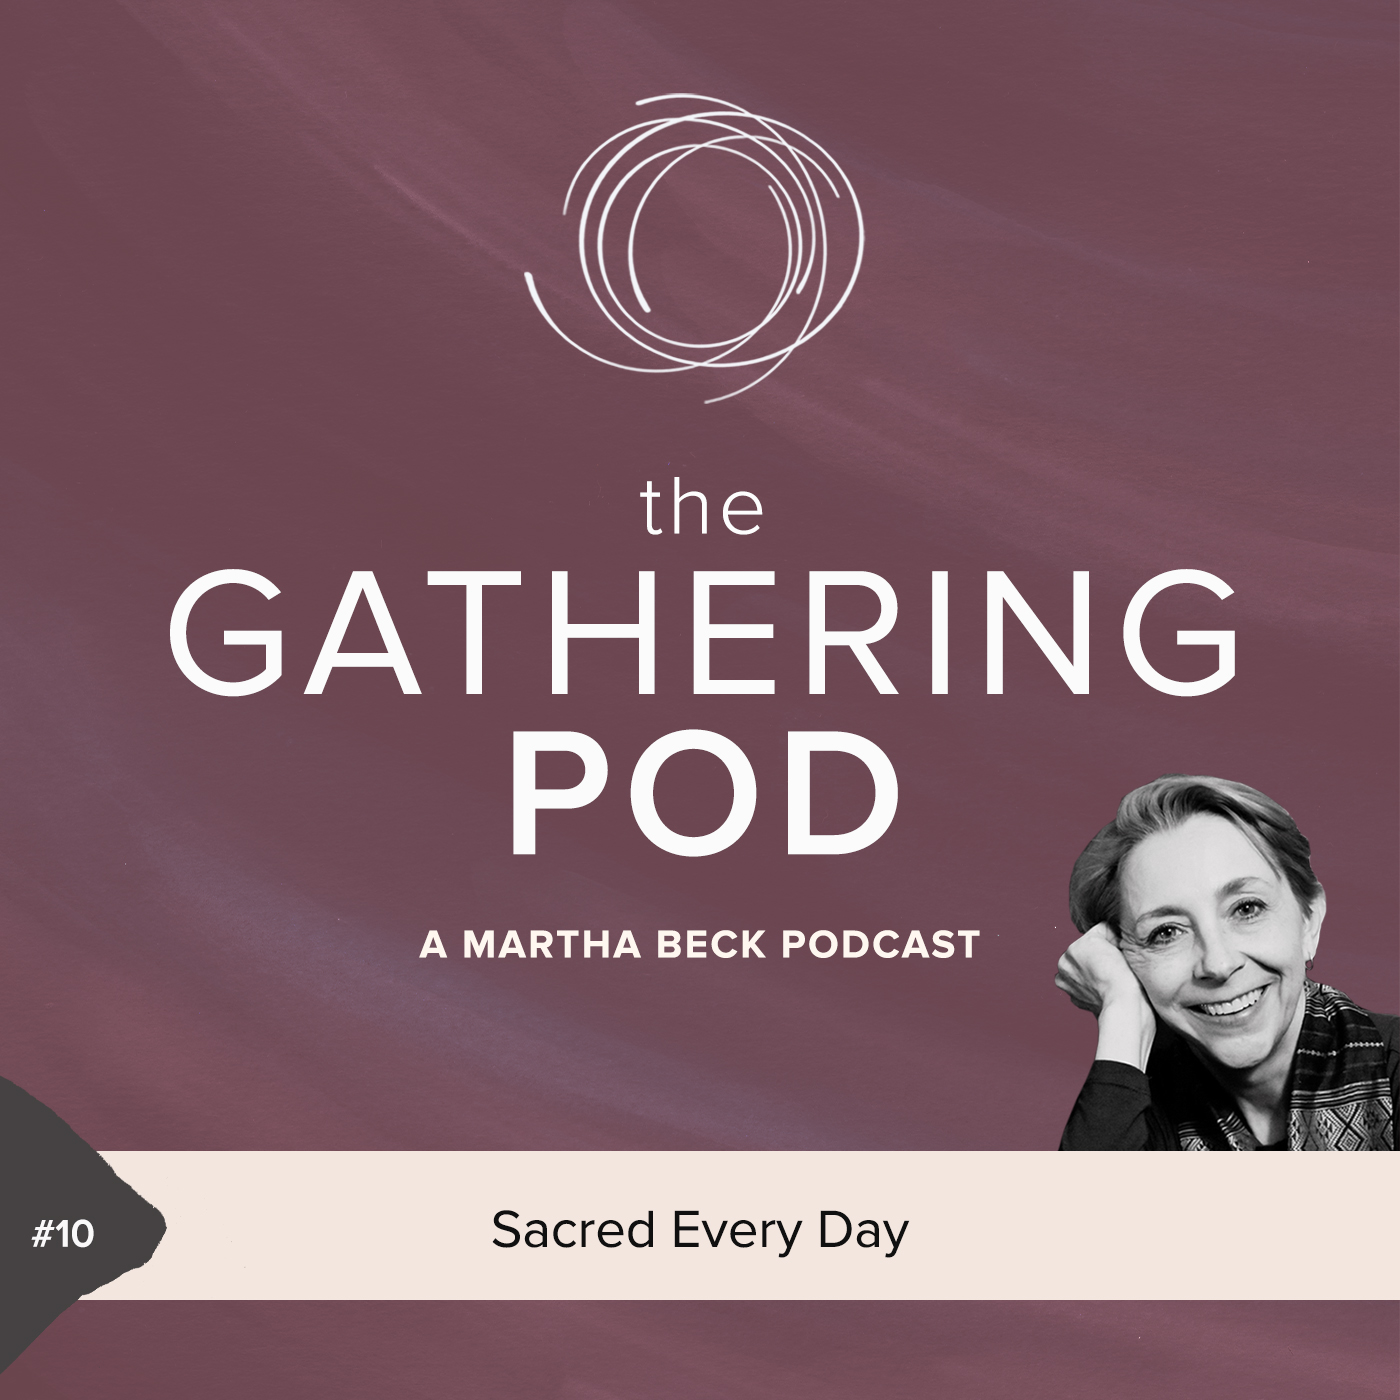 Image for The Gathering Pod A Martha Beck Podcast Episode #10 Sacred Every Day